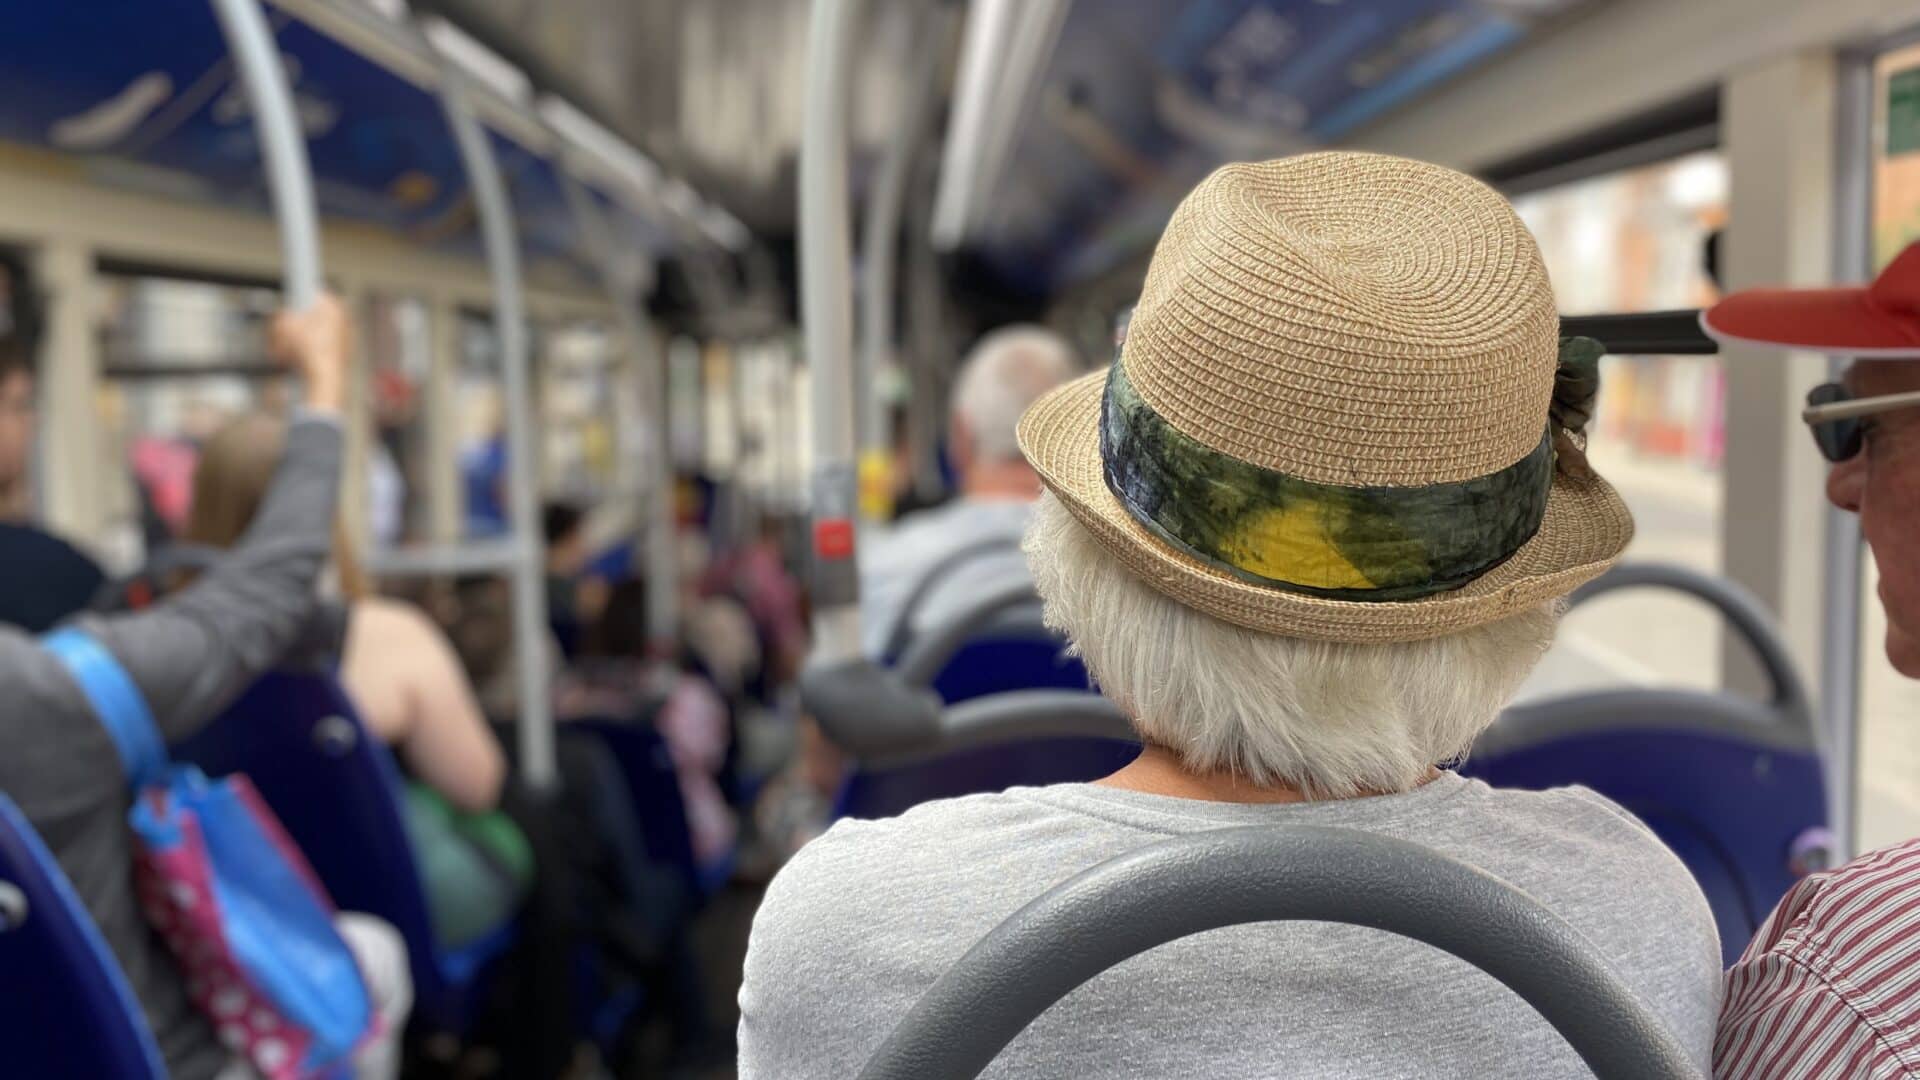 An older, fashionable lady sitting at the back of a busy single decker bus.